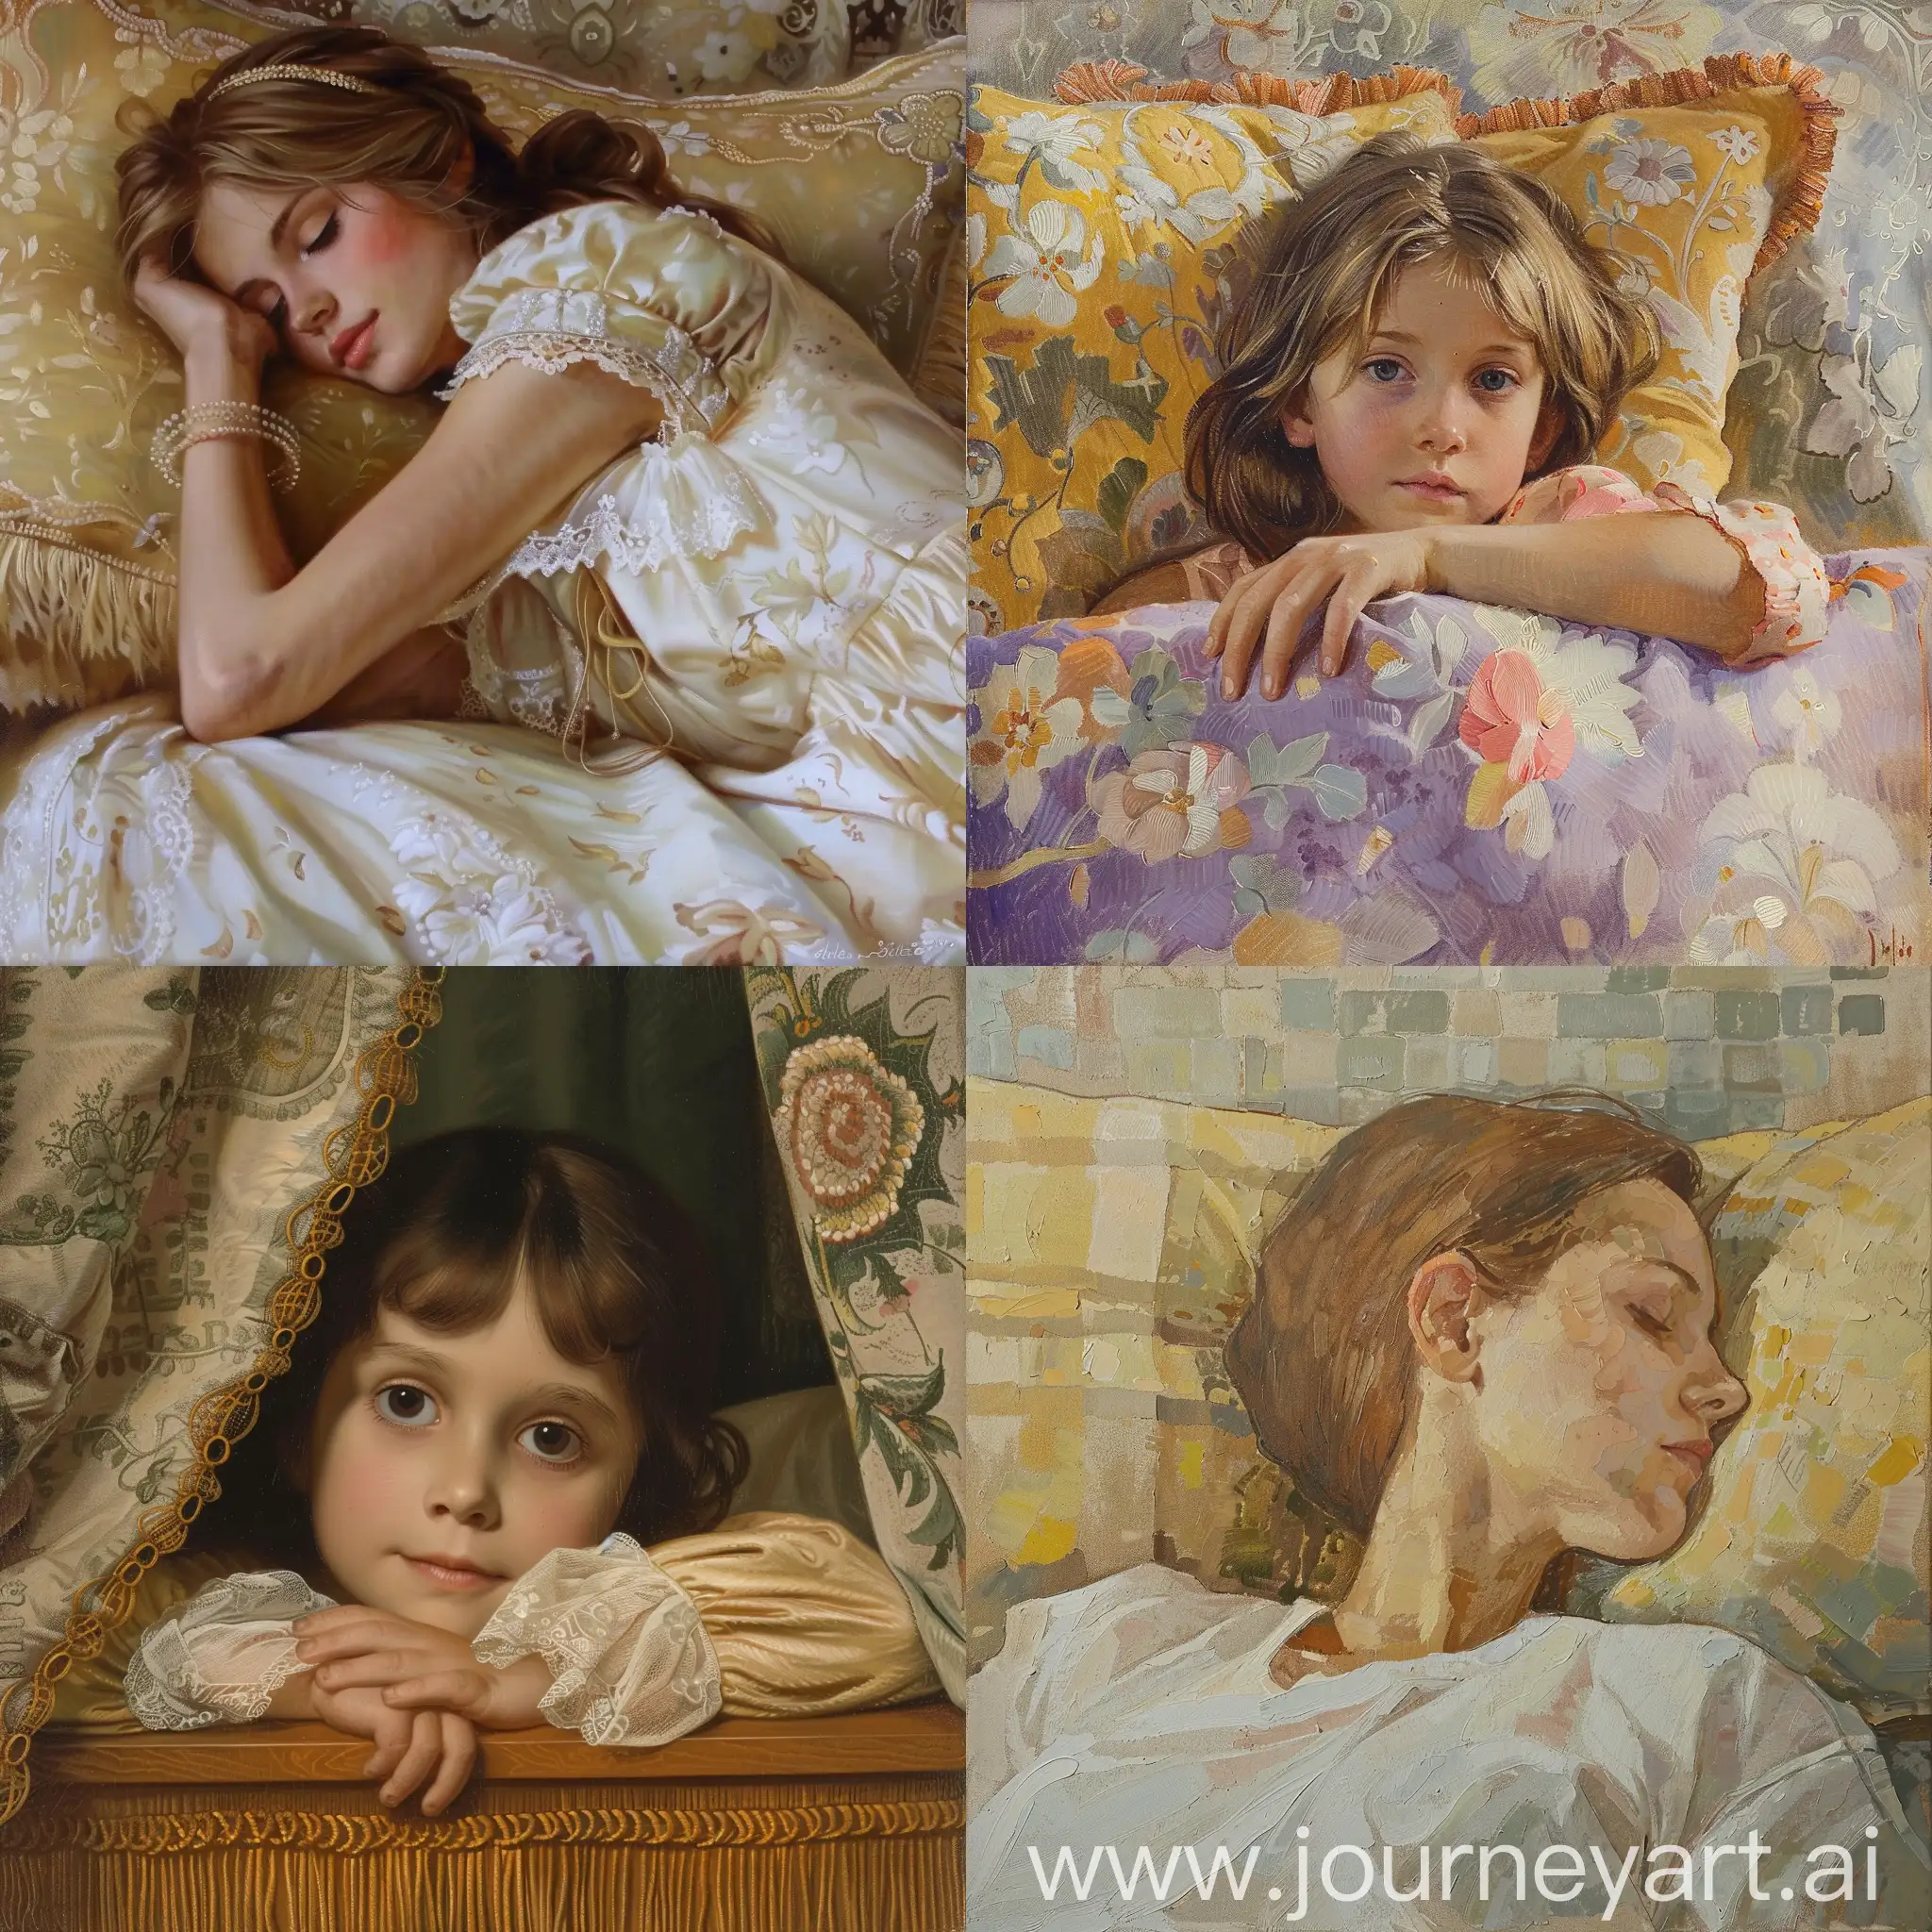 Young girl in bed